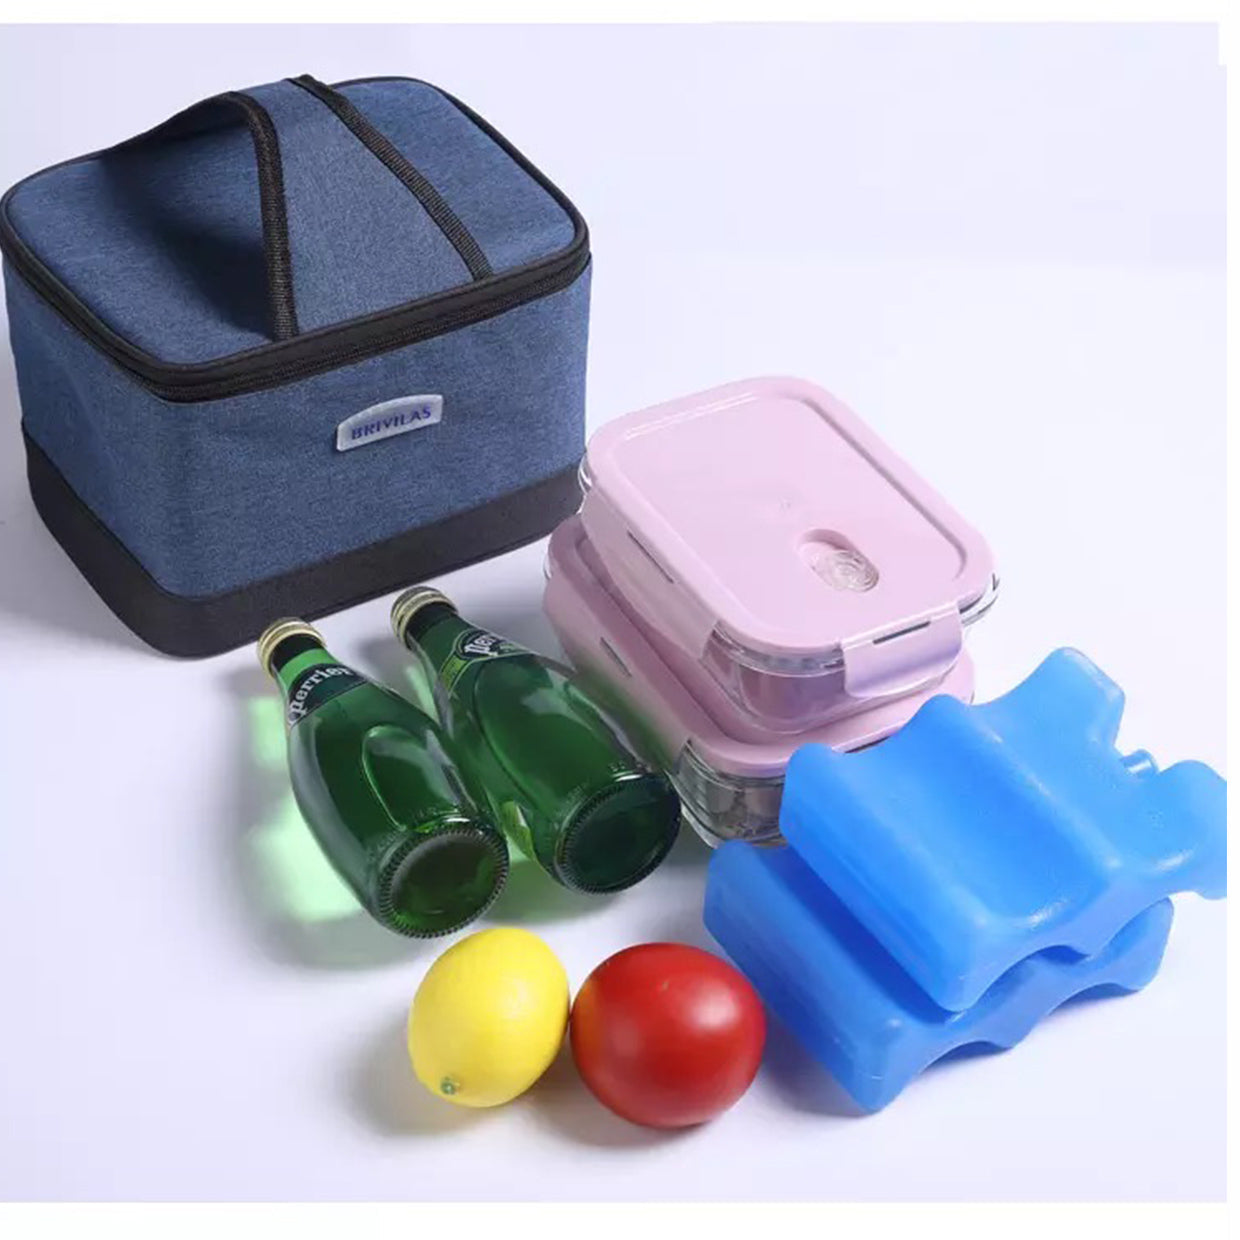 Buy 2 Get 1 Free | New Insulated Lunch Tiffin Bag